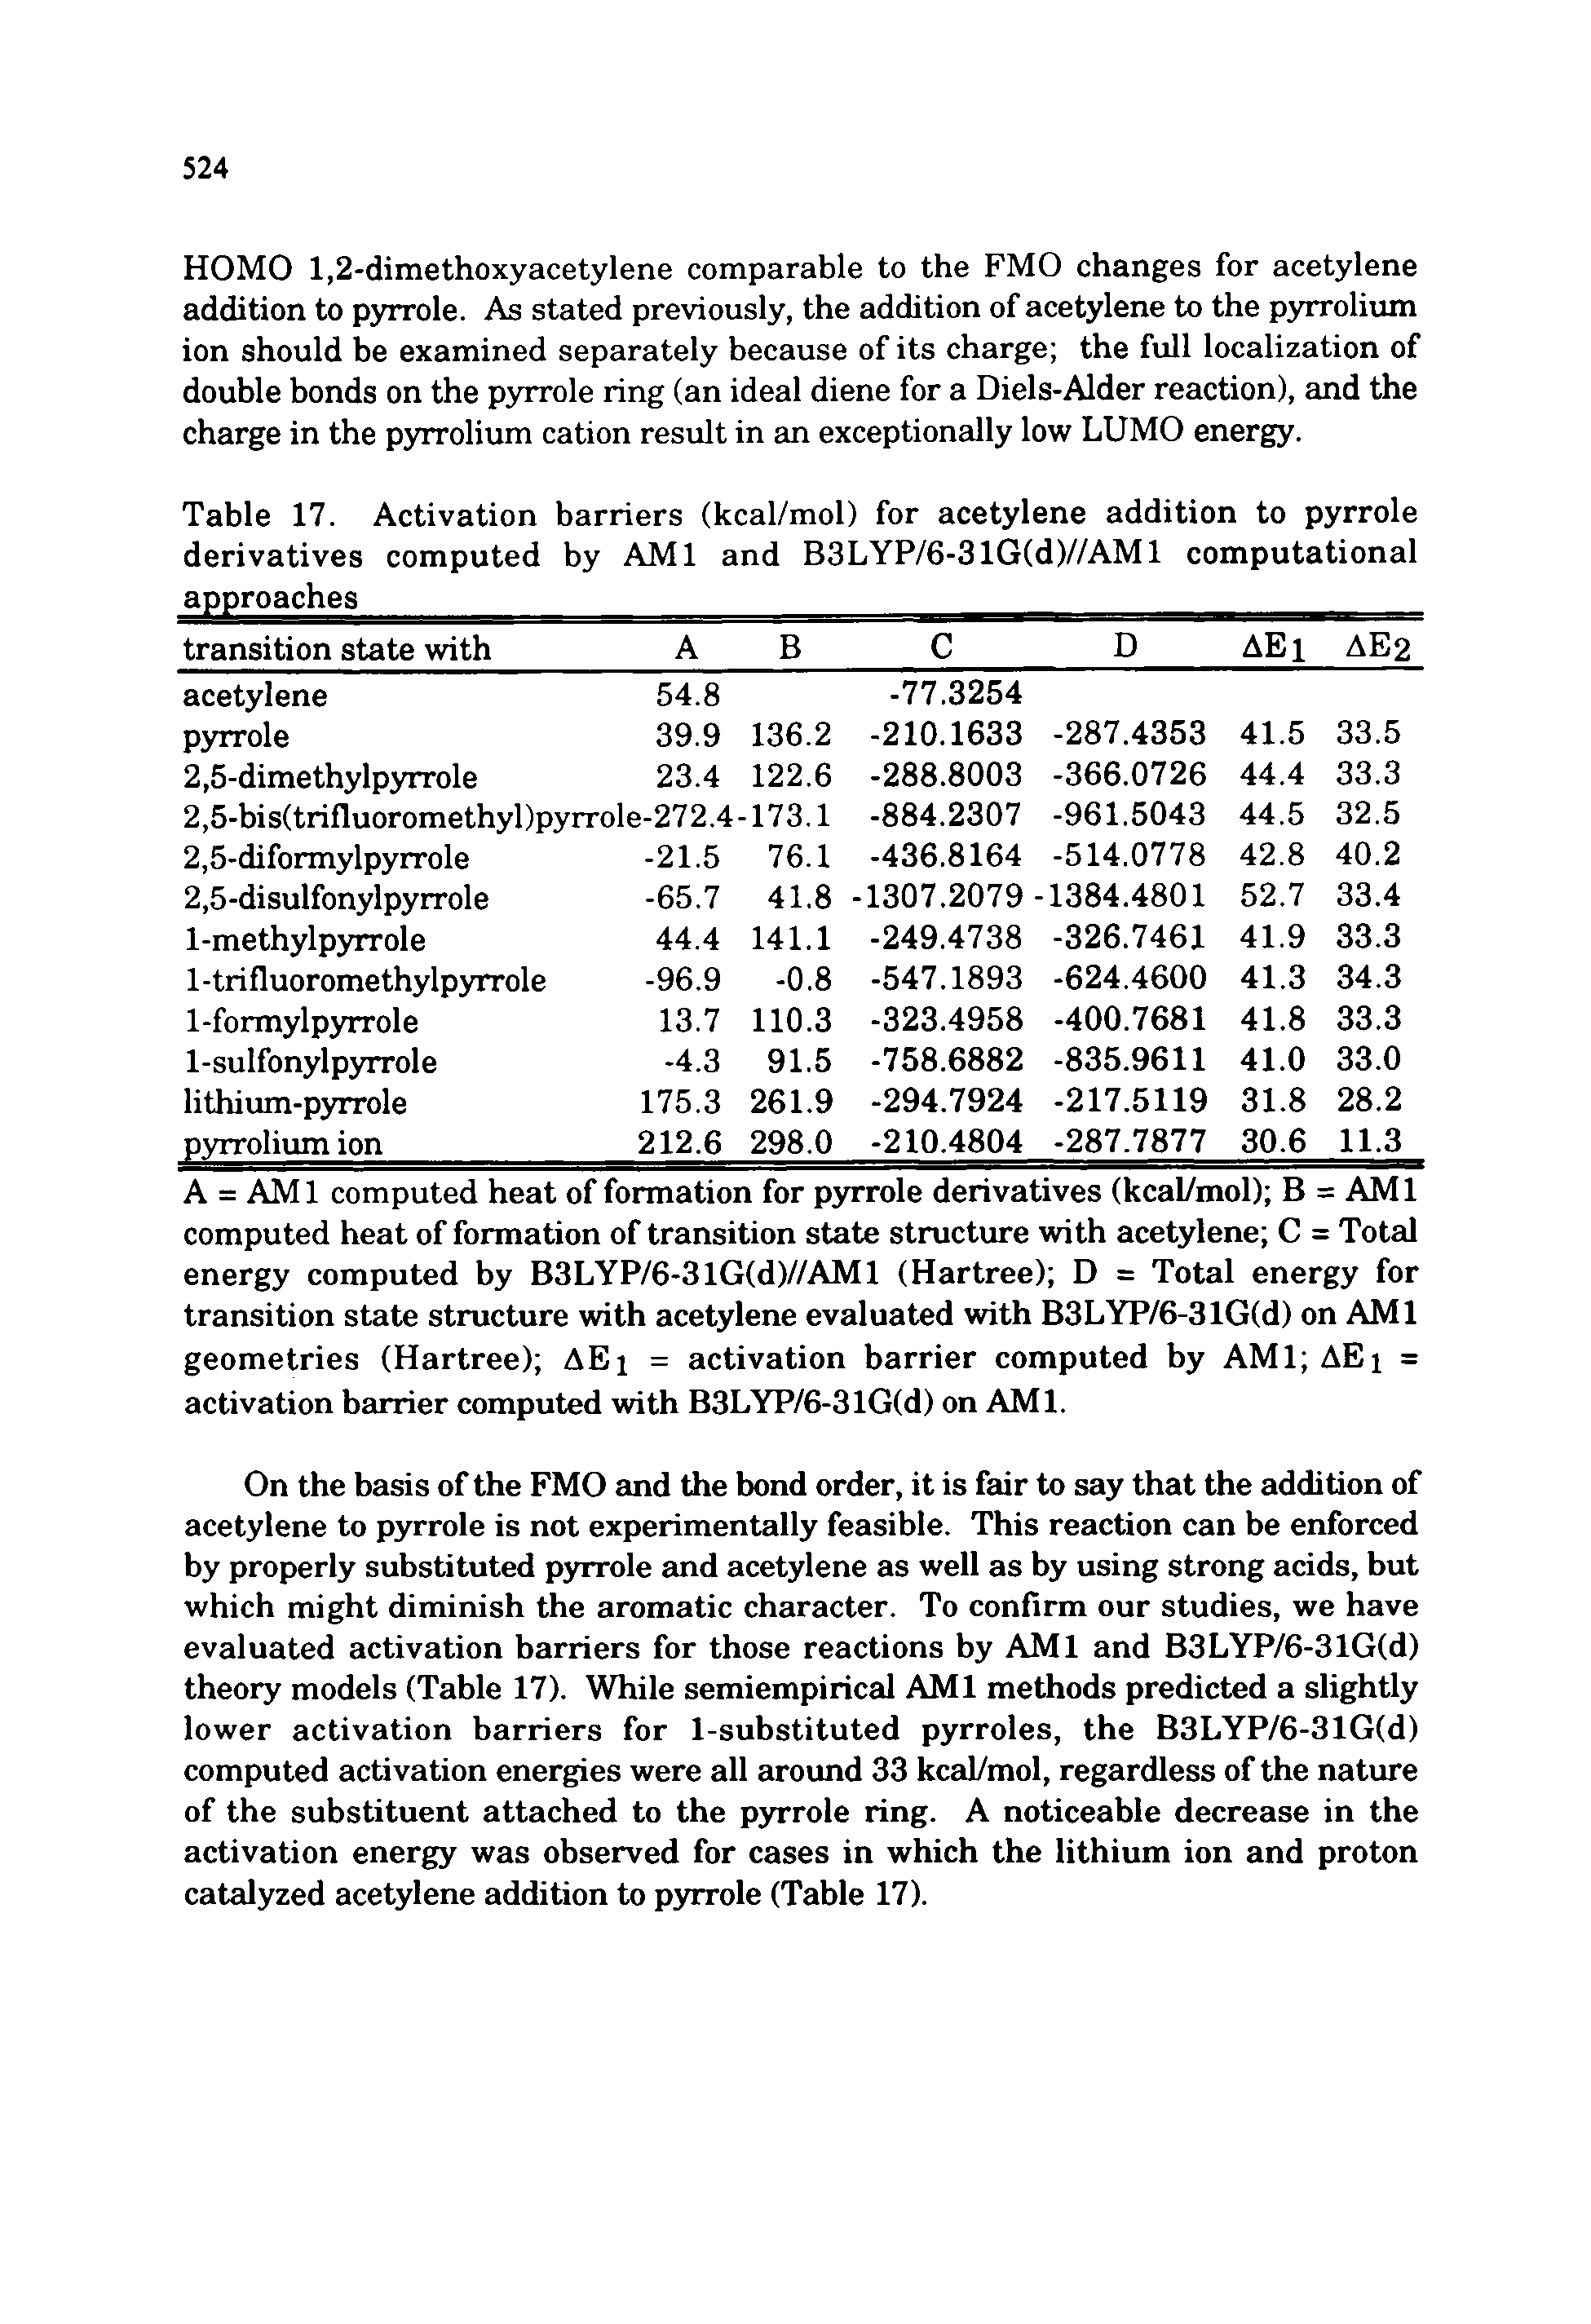 Table 17. Activation barriers (kcal/mol) for acetylene addition to pyrrole derivatives computed by AMI and B3LYP/6-3lG(d)//AMl computational...